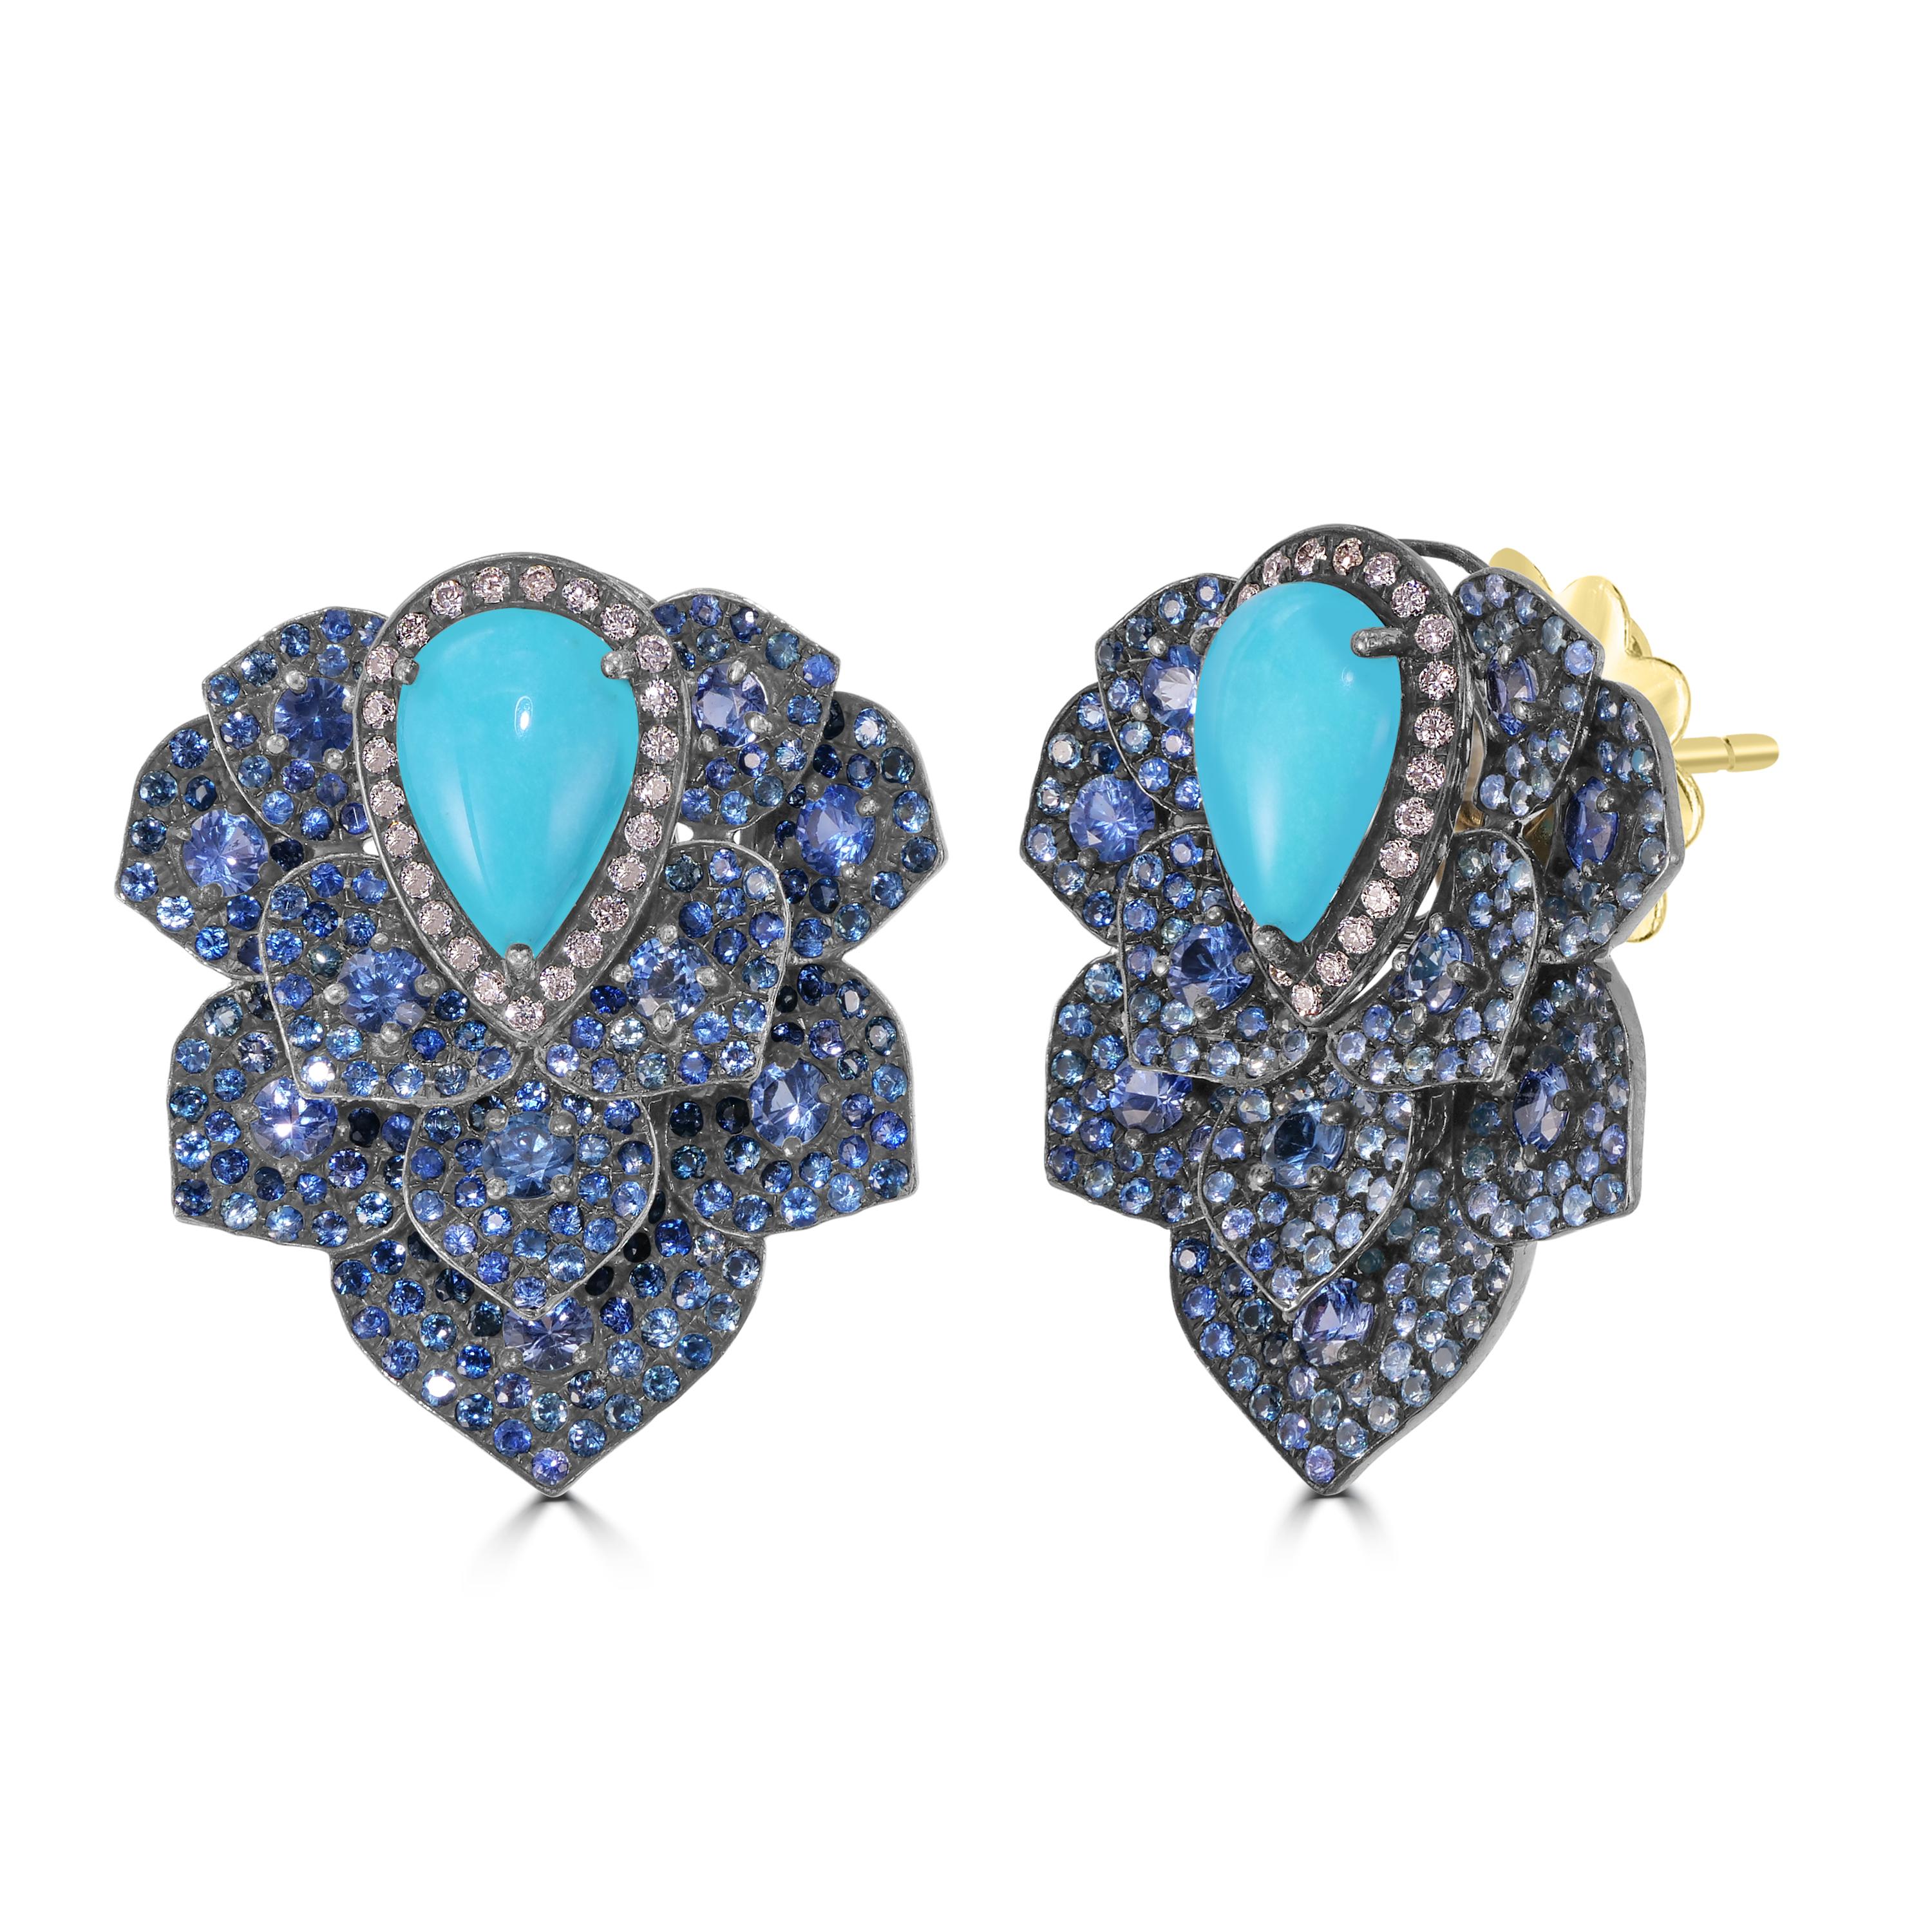 Step into the enchanting world of Victorian elegance with our 11.18 Cttw. Turquoise, Blue Sapphire, and Diamond Stud Earrings. These earrings are a masterful fusion of intricate design, vibrant gemstones, and exquisite craftsmanship.

The